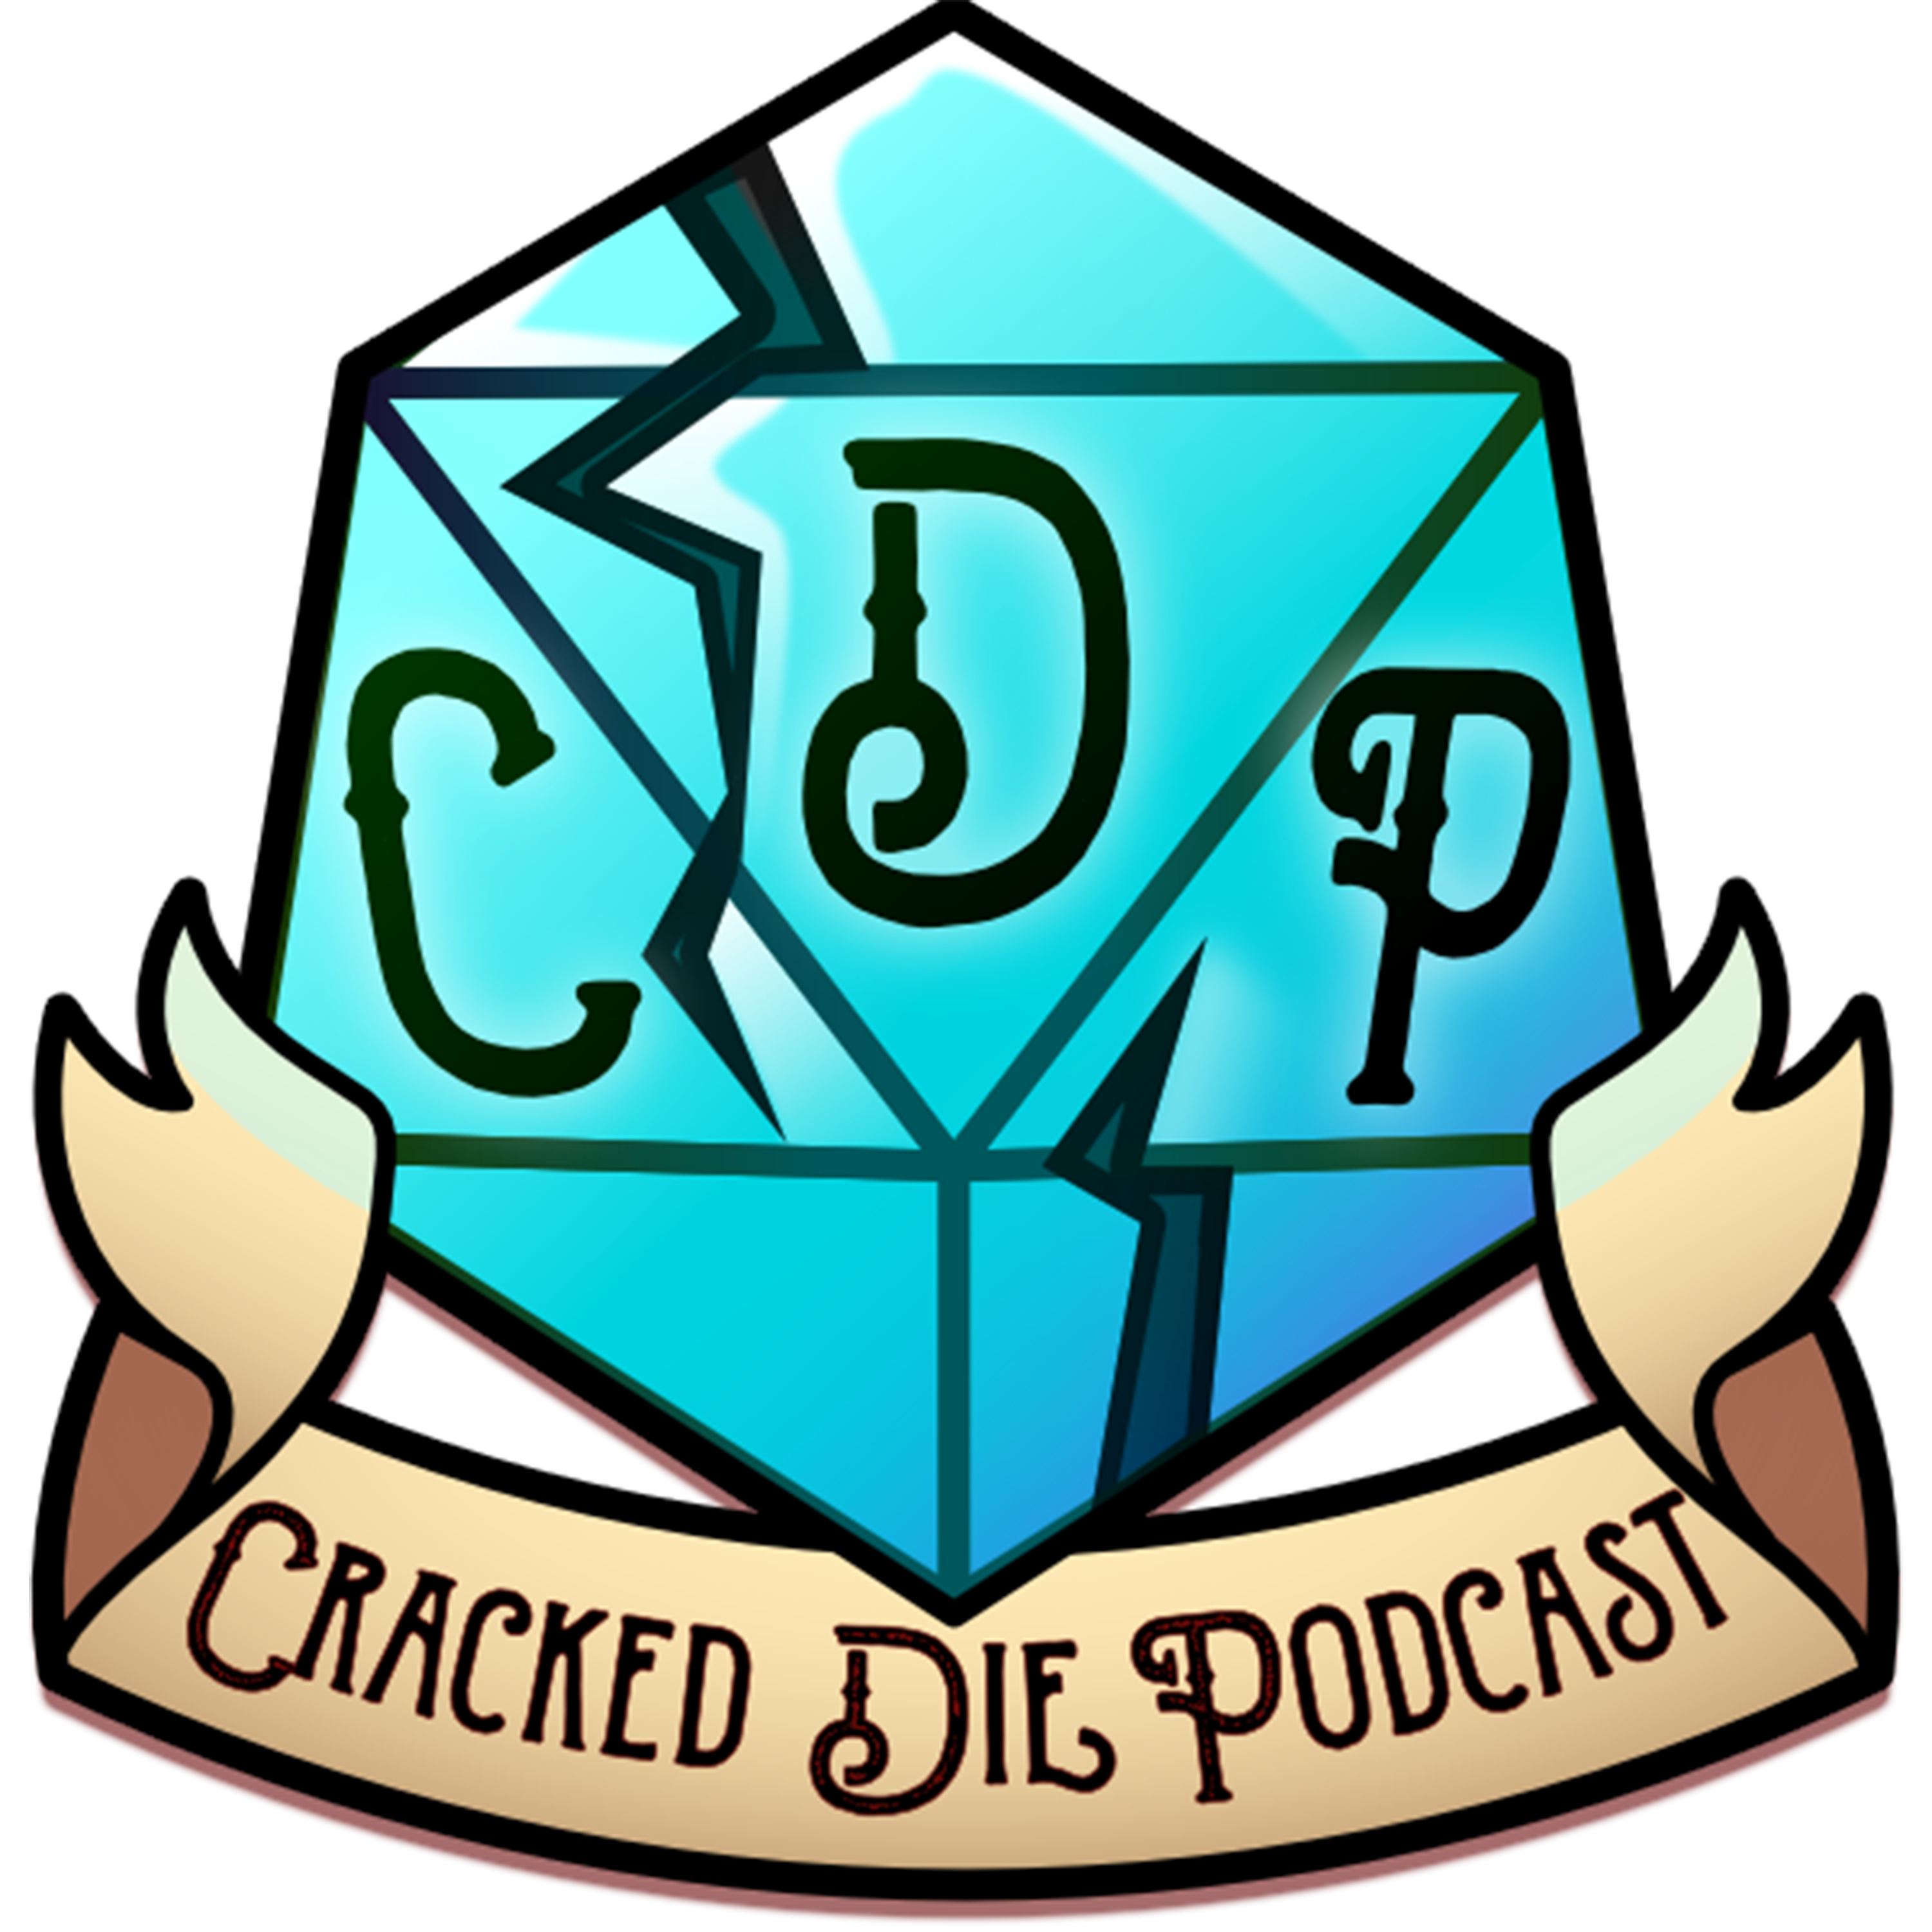 The Cracked Die Podcast - Episode 43 - Elephant Ride